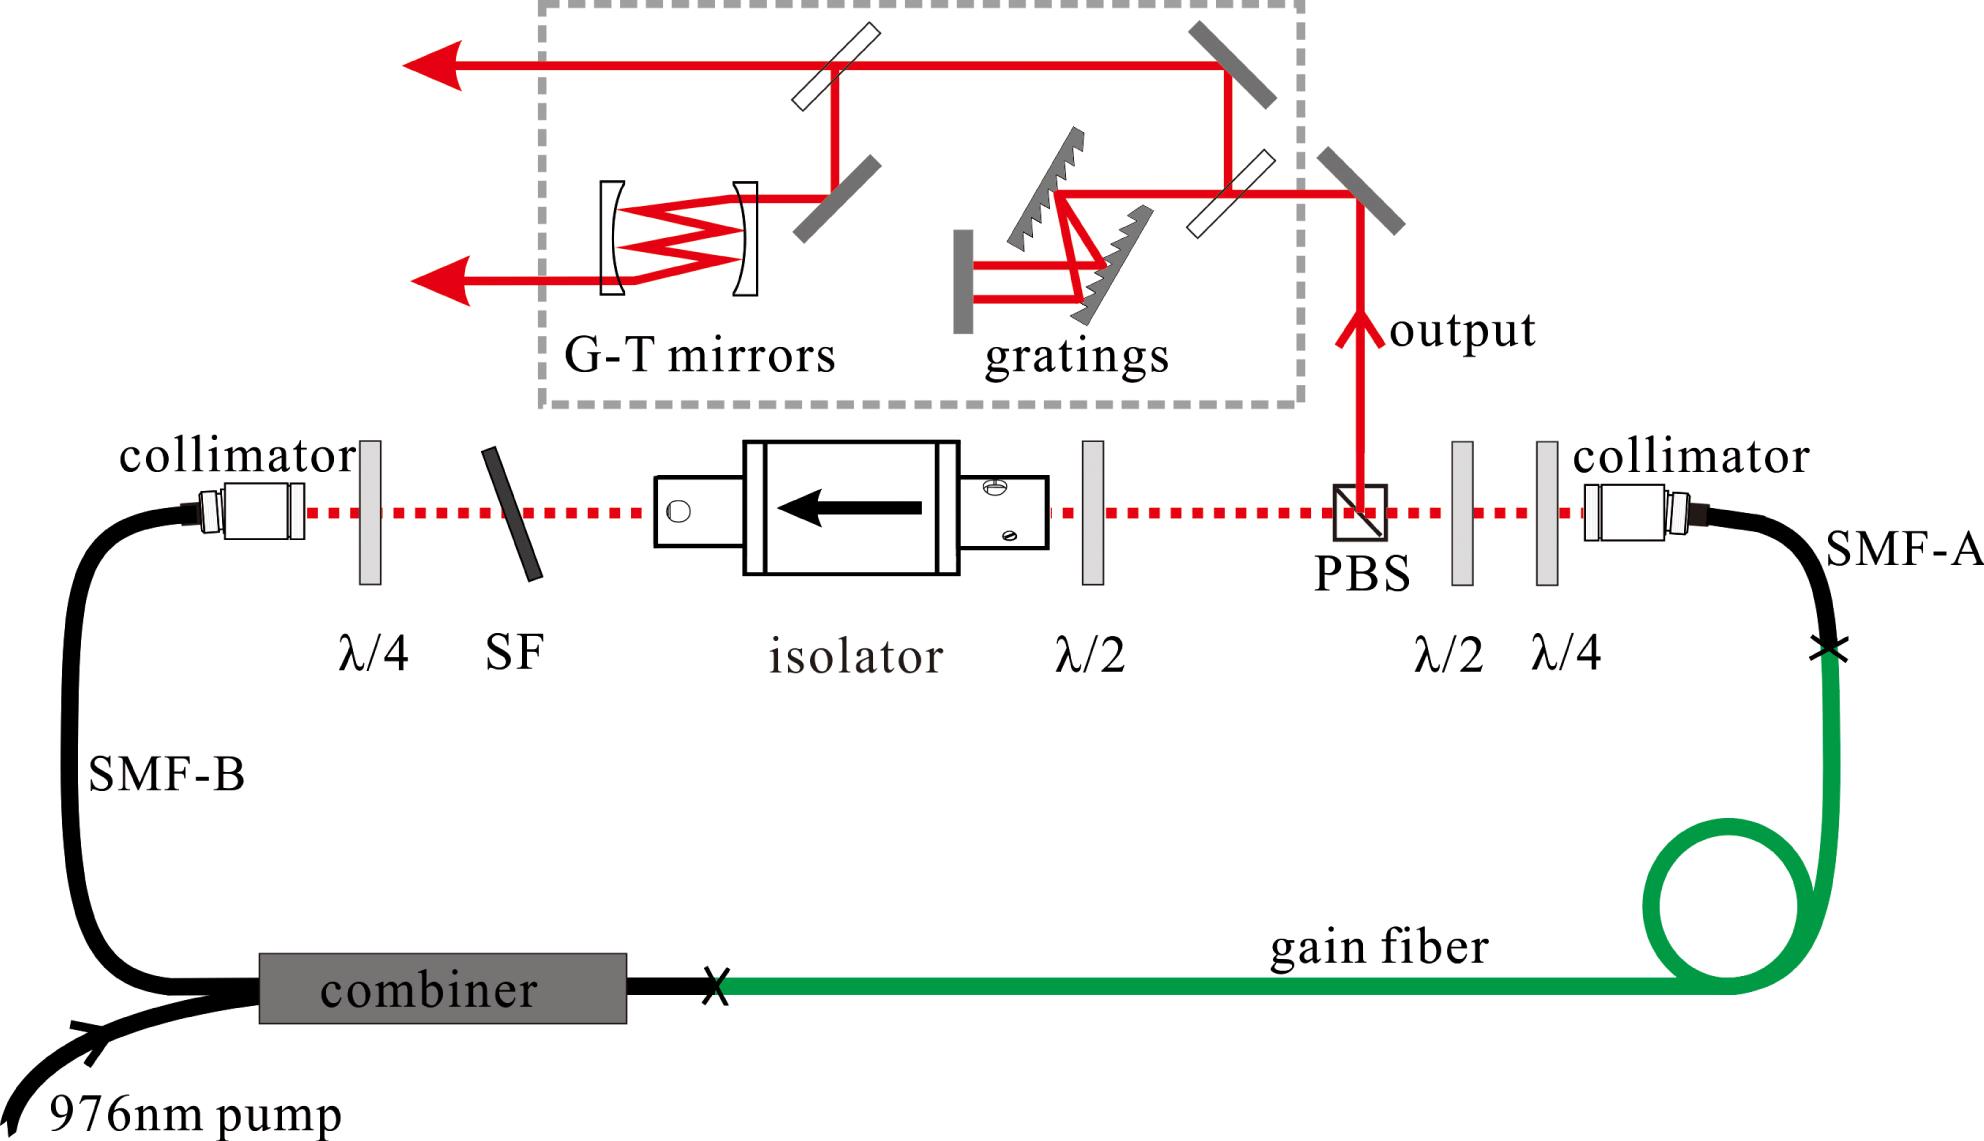 Schematic of the experimental setup. SF, spectral filter; PBS, polarizing beam splitter; gratings and G-T mirrors comprise the VDC, which is shown in the dotted frame. The two output beams are measured to analyze compression result with the grating pair only and VDC.